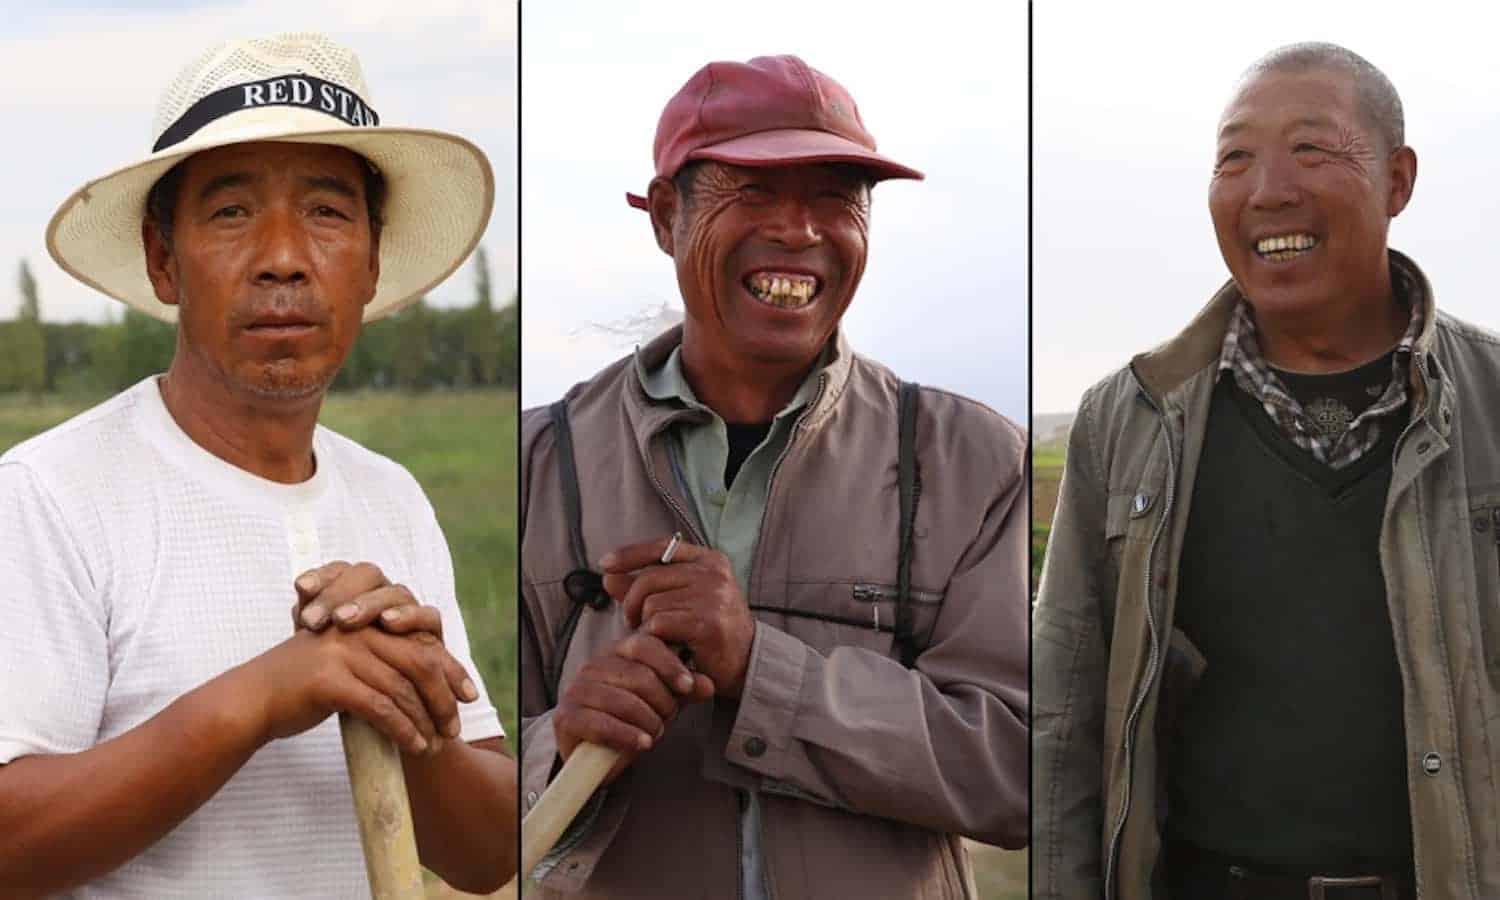 In Inner Mongolia, farmers are re-harnessing alfalfa for feed, seed, and better livelihoods.